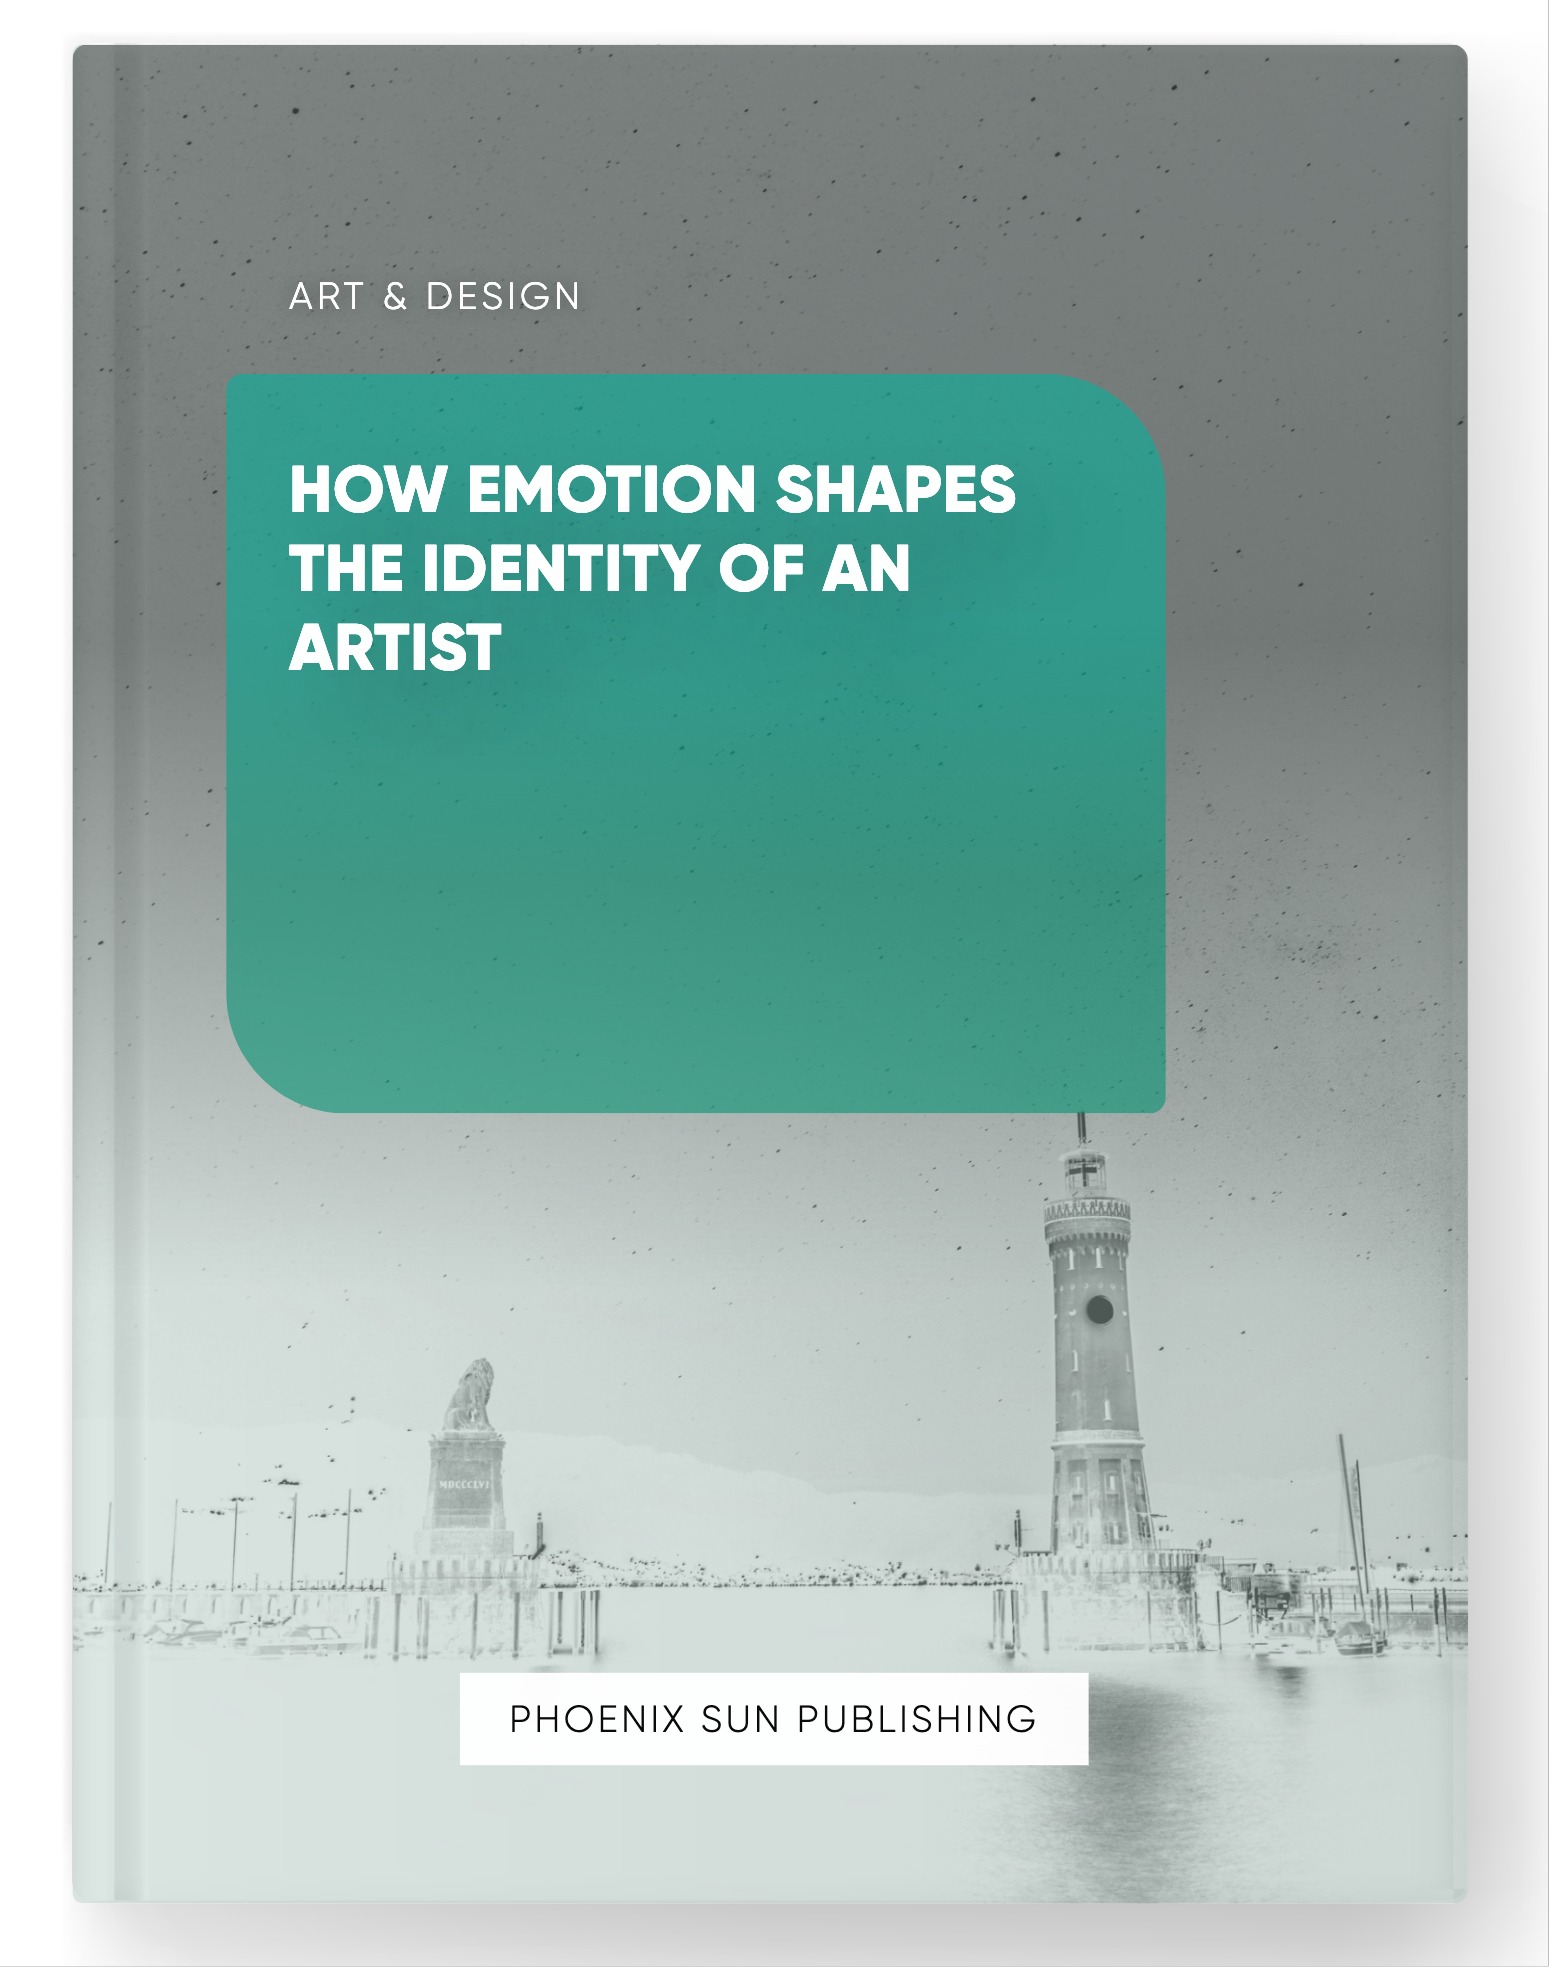 How Emotion Shapes the Identity of an Artist